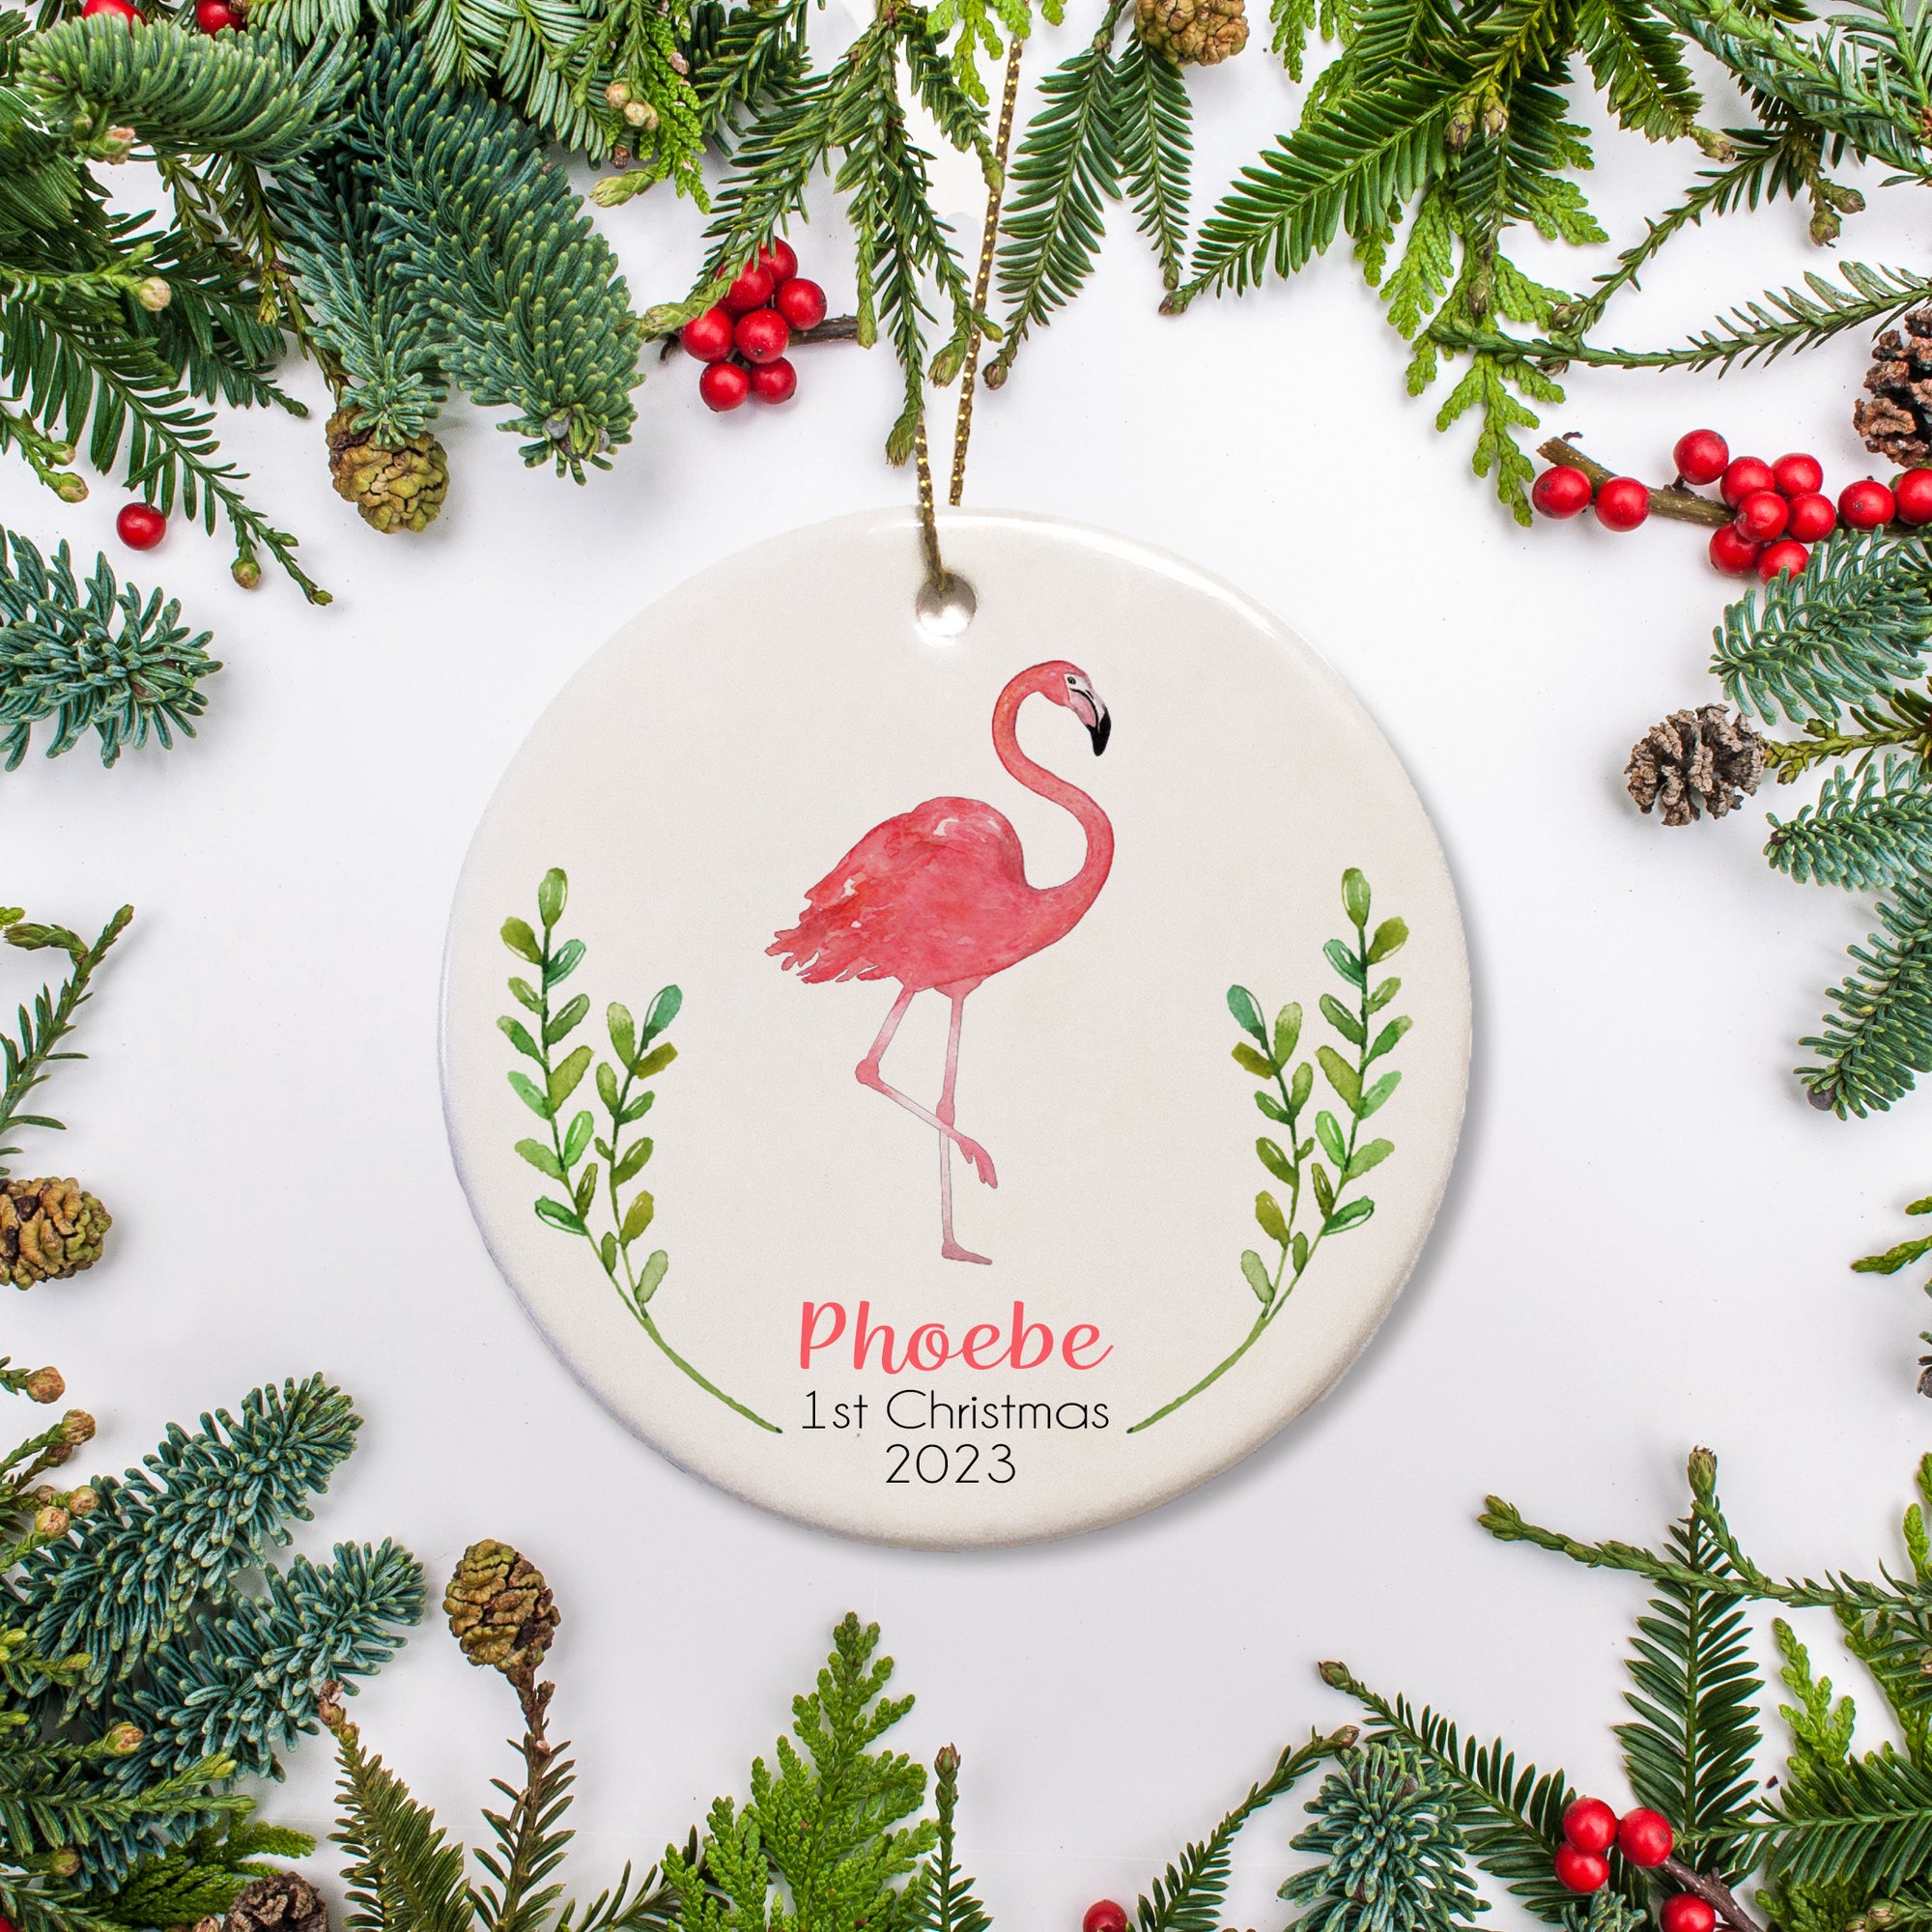 Flamingo Christmas Ornament for baby's first Christmas, ceramic personalized with name